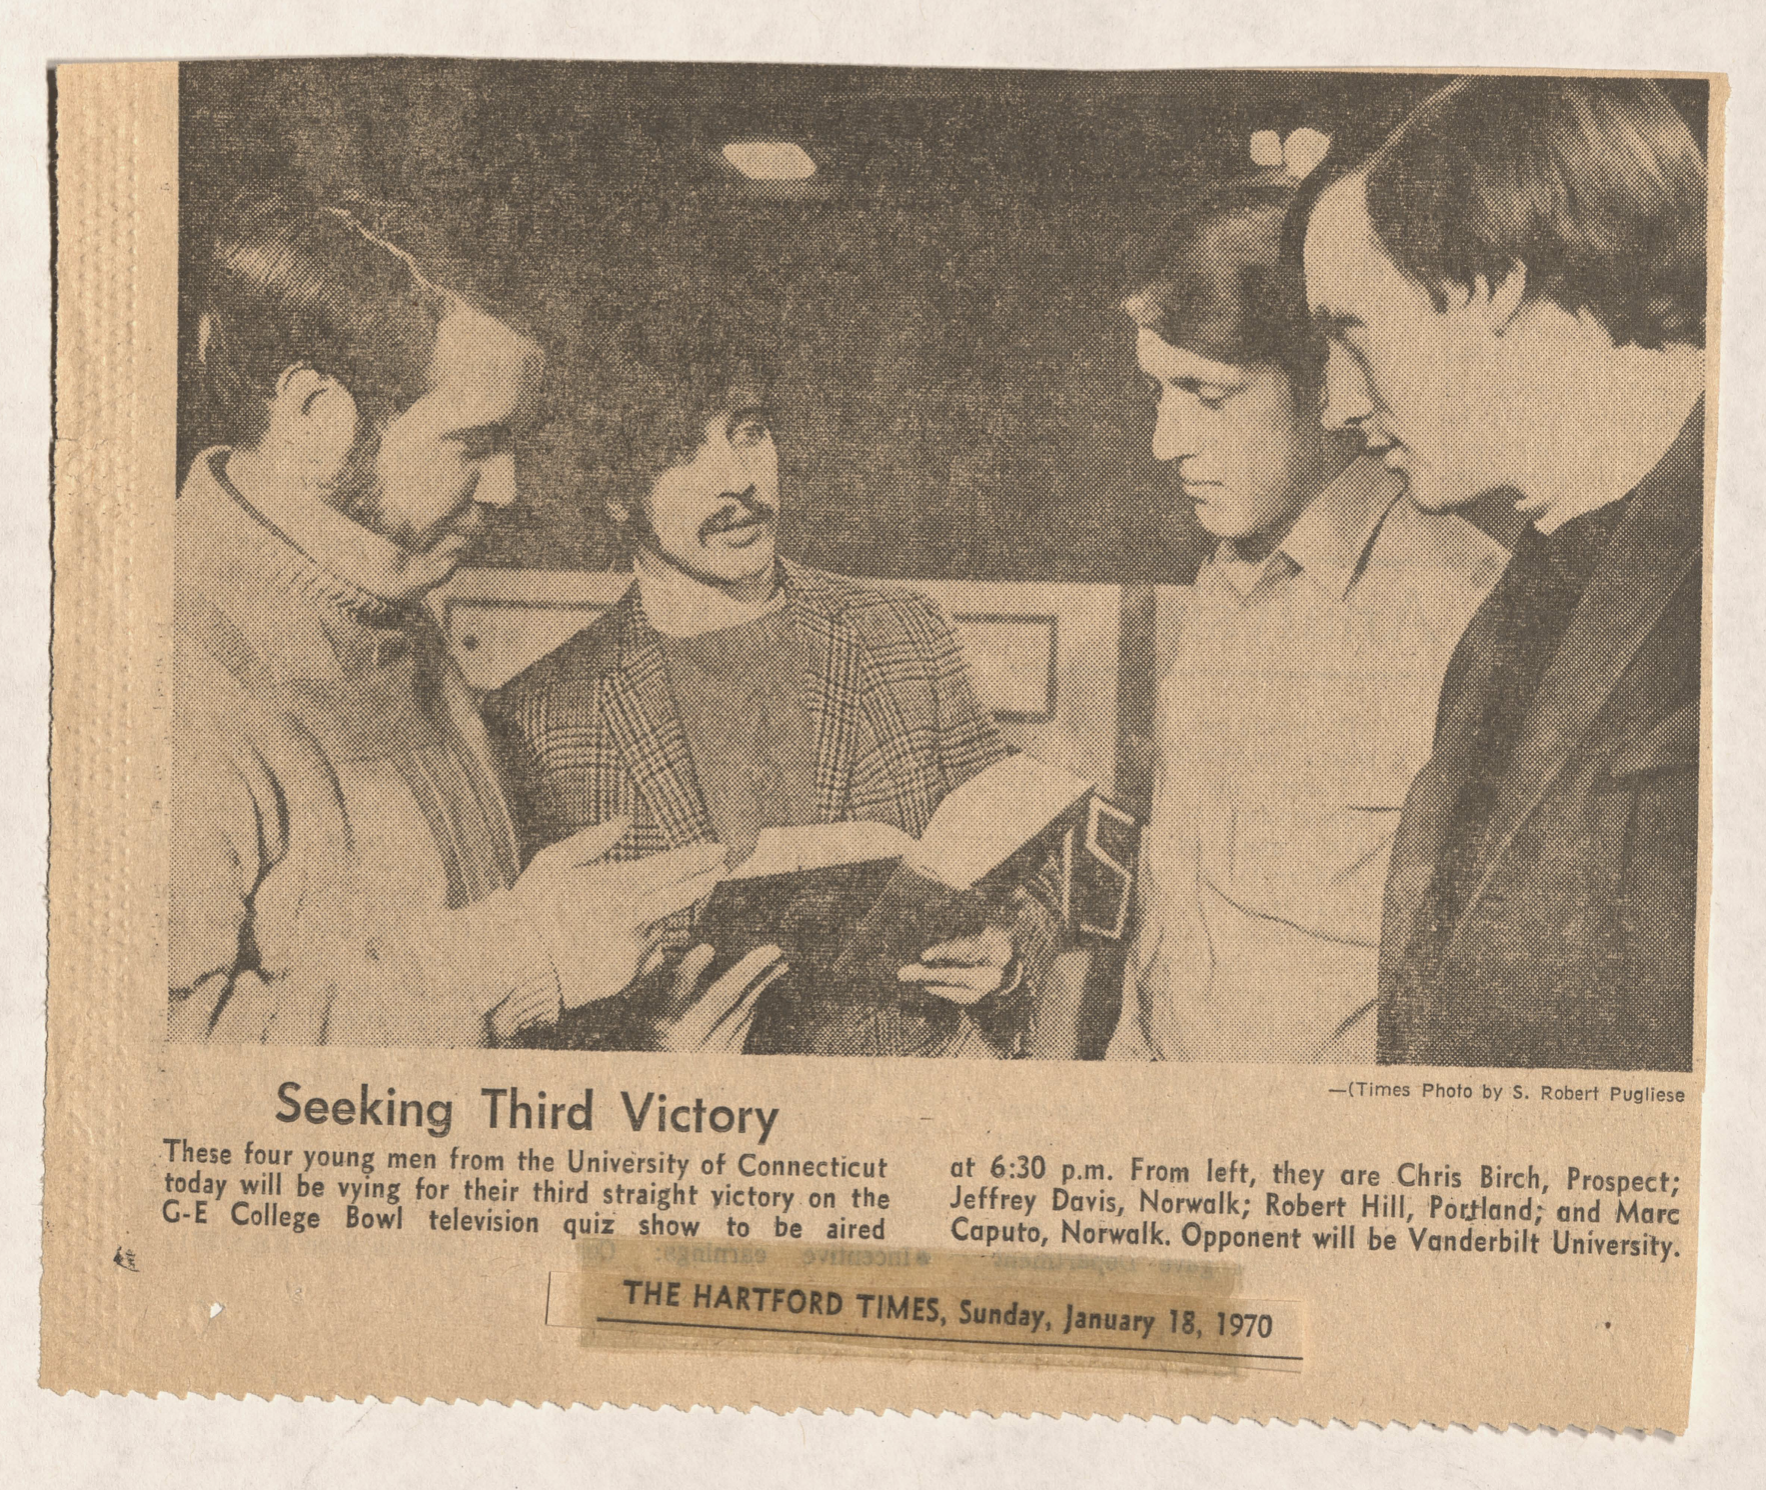 Hardford Times Newsclipping featuring the 1970 CollegeBowl team